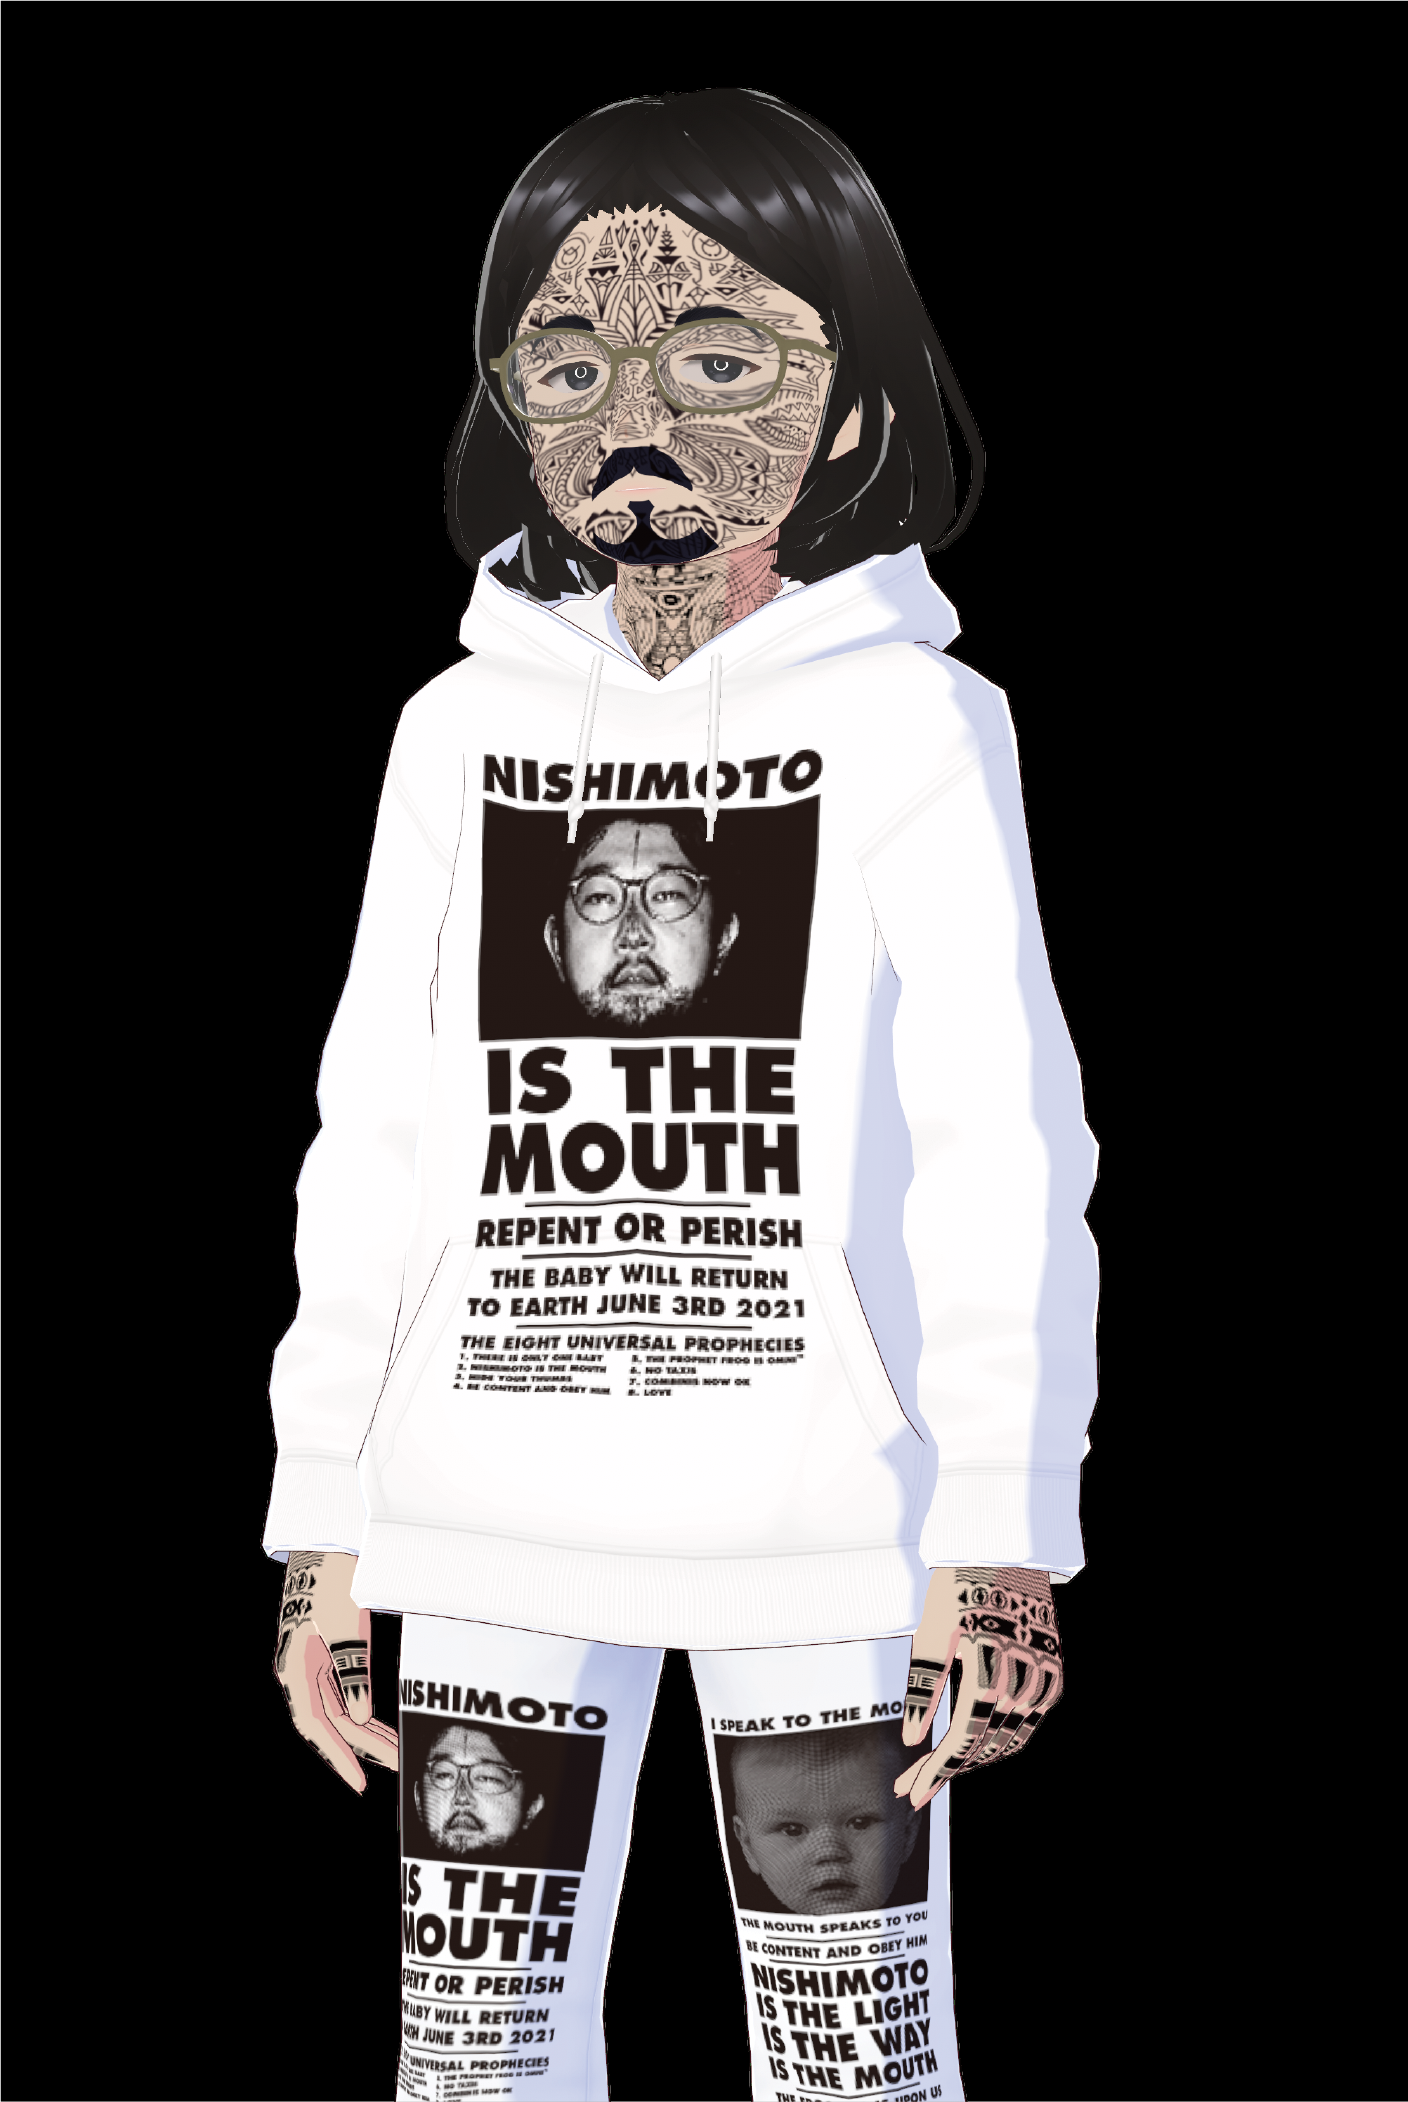 Nishimoto is the mouth